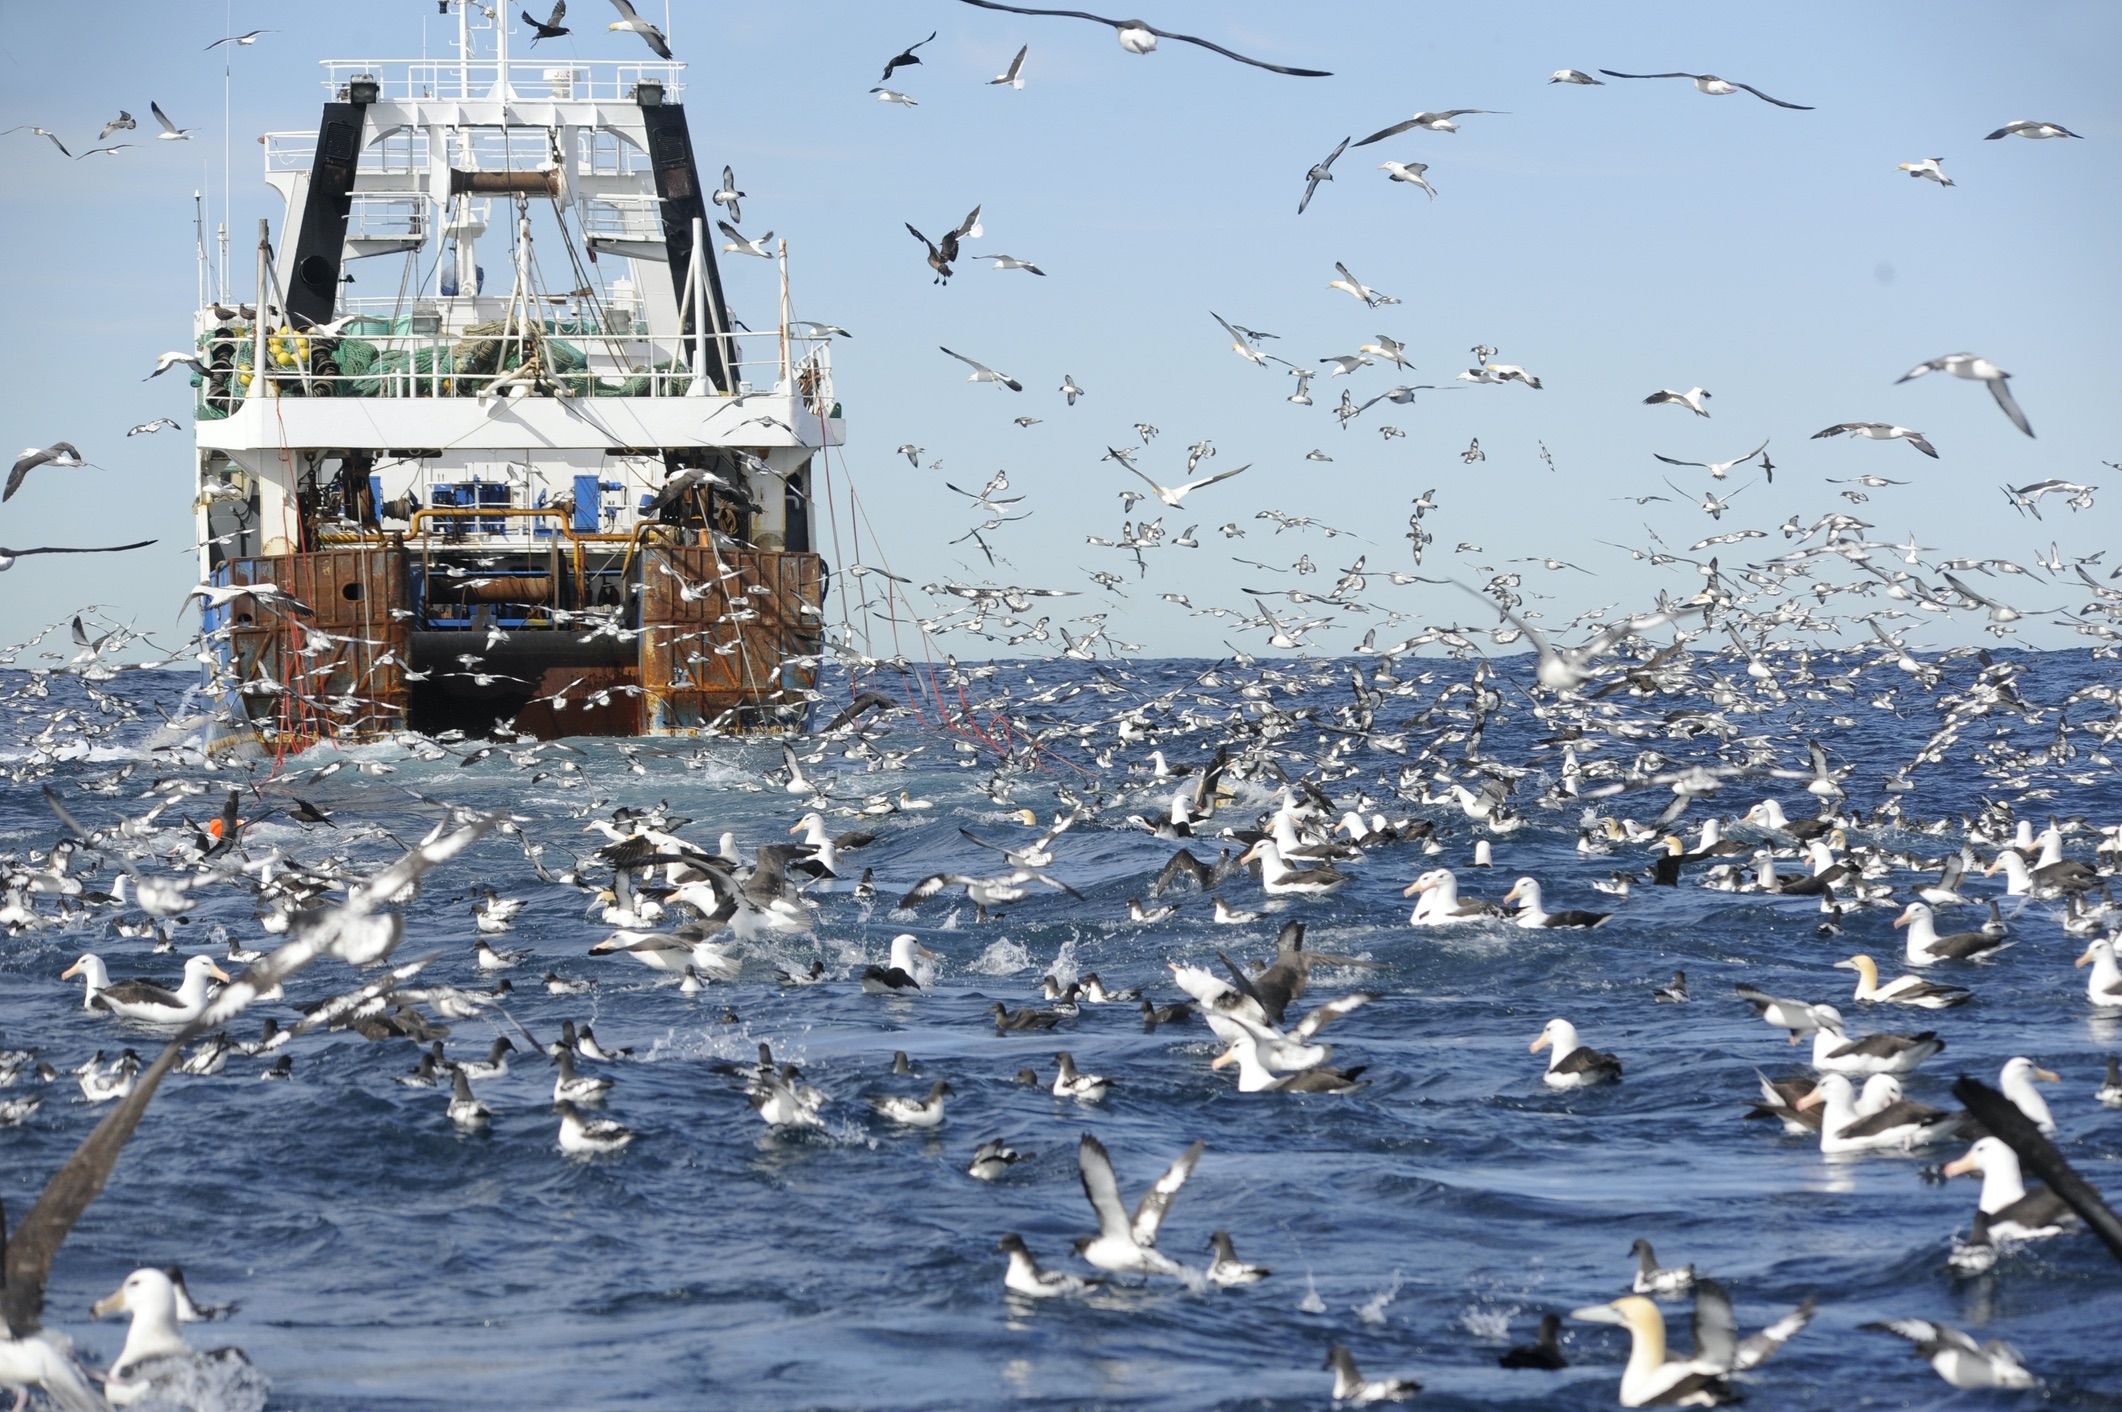 a large industrial fishing vessel surrounded by seabirds